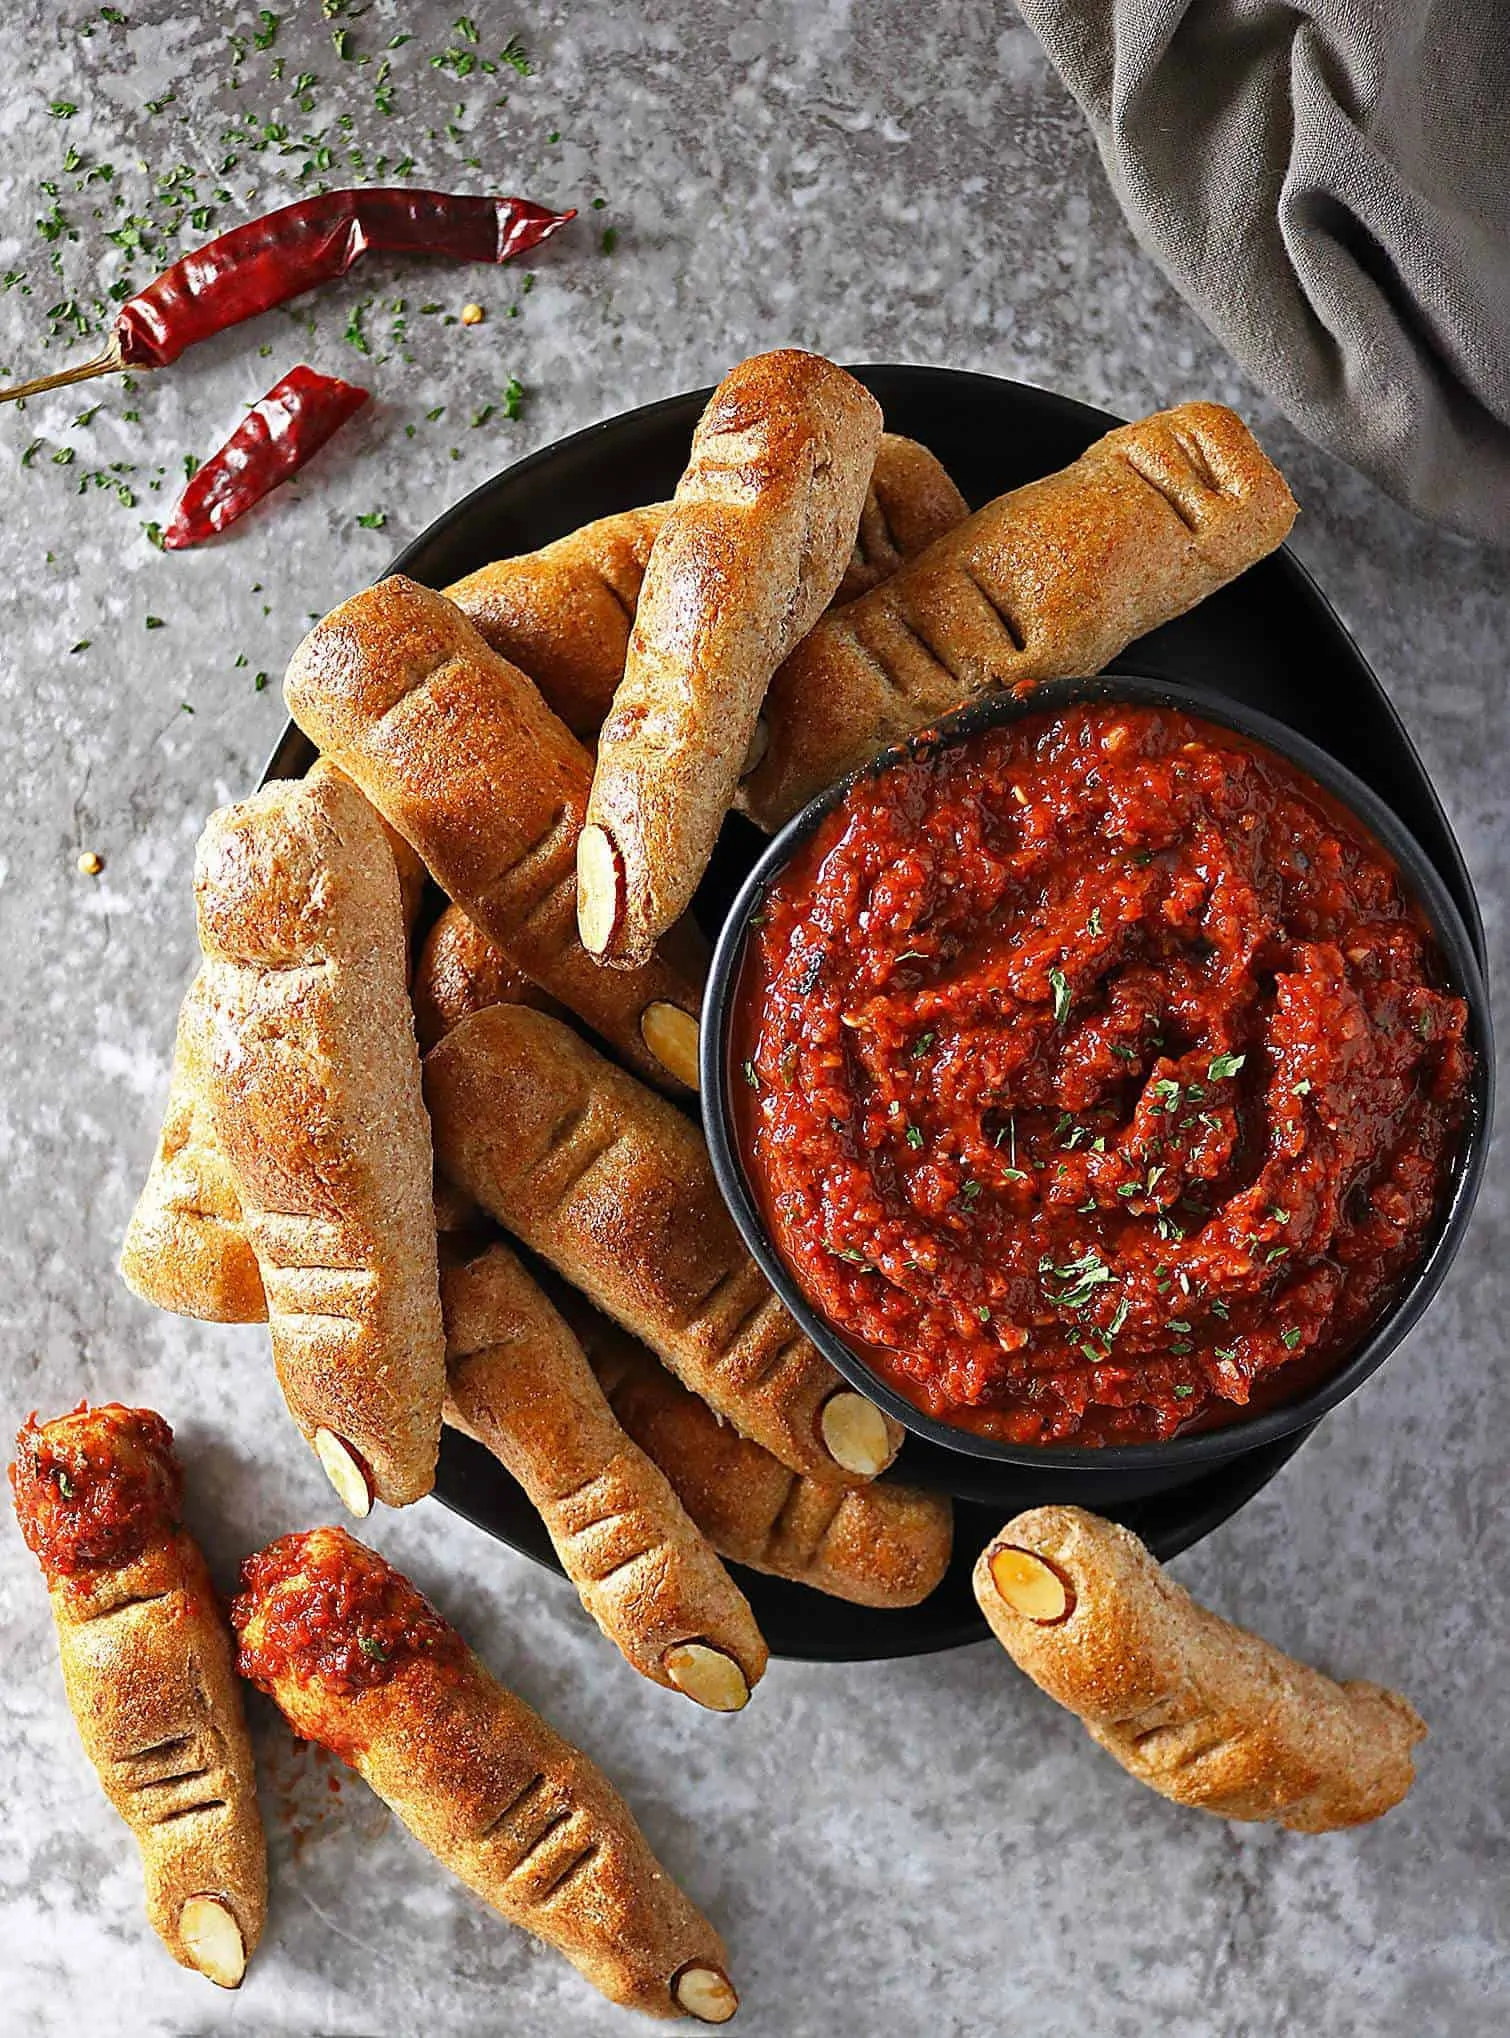 Overhead view of bowl of Roasted Red Pepper & Red Wine Dip and Whole Wheat Finger Breadsticks scattered around